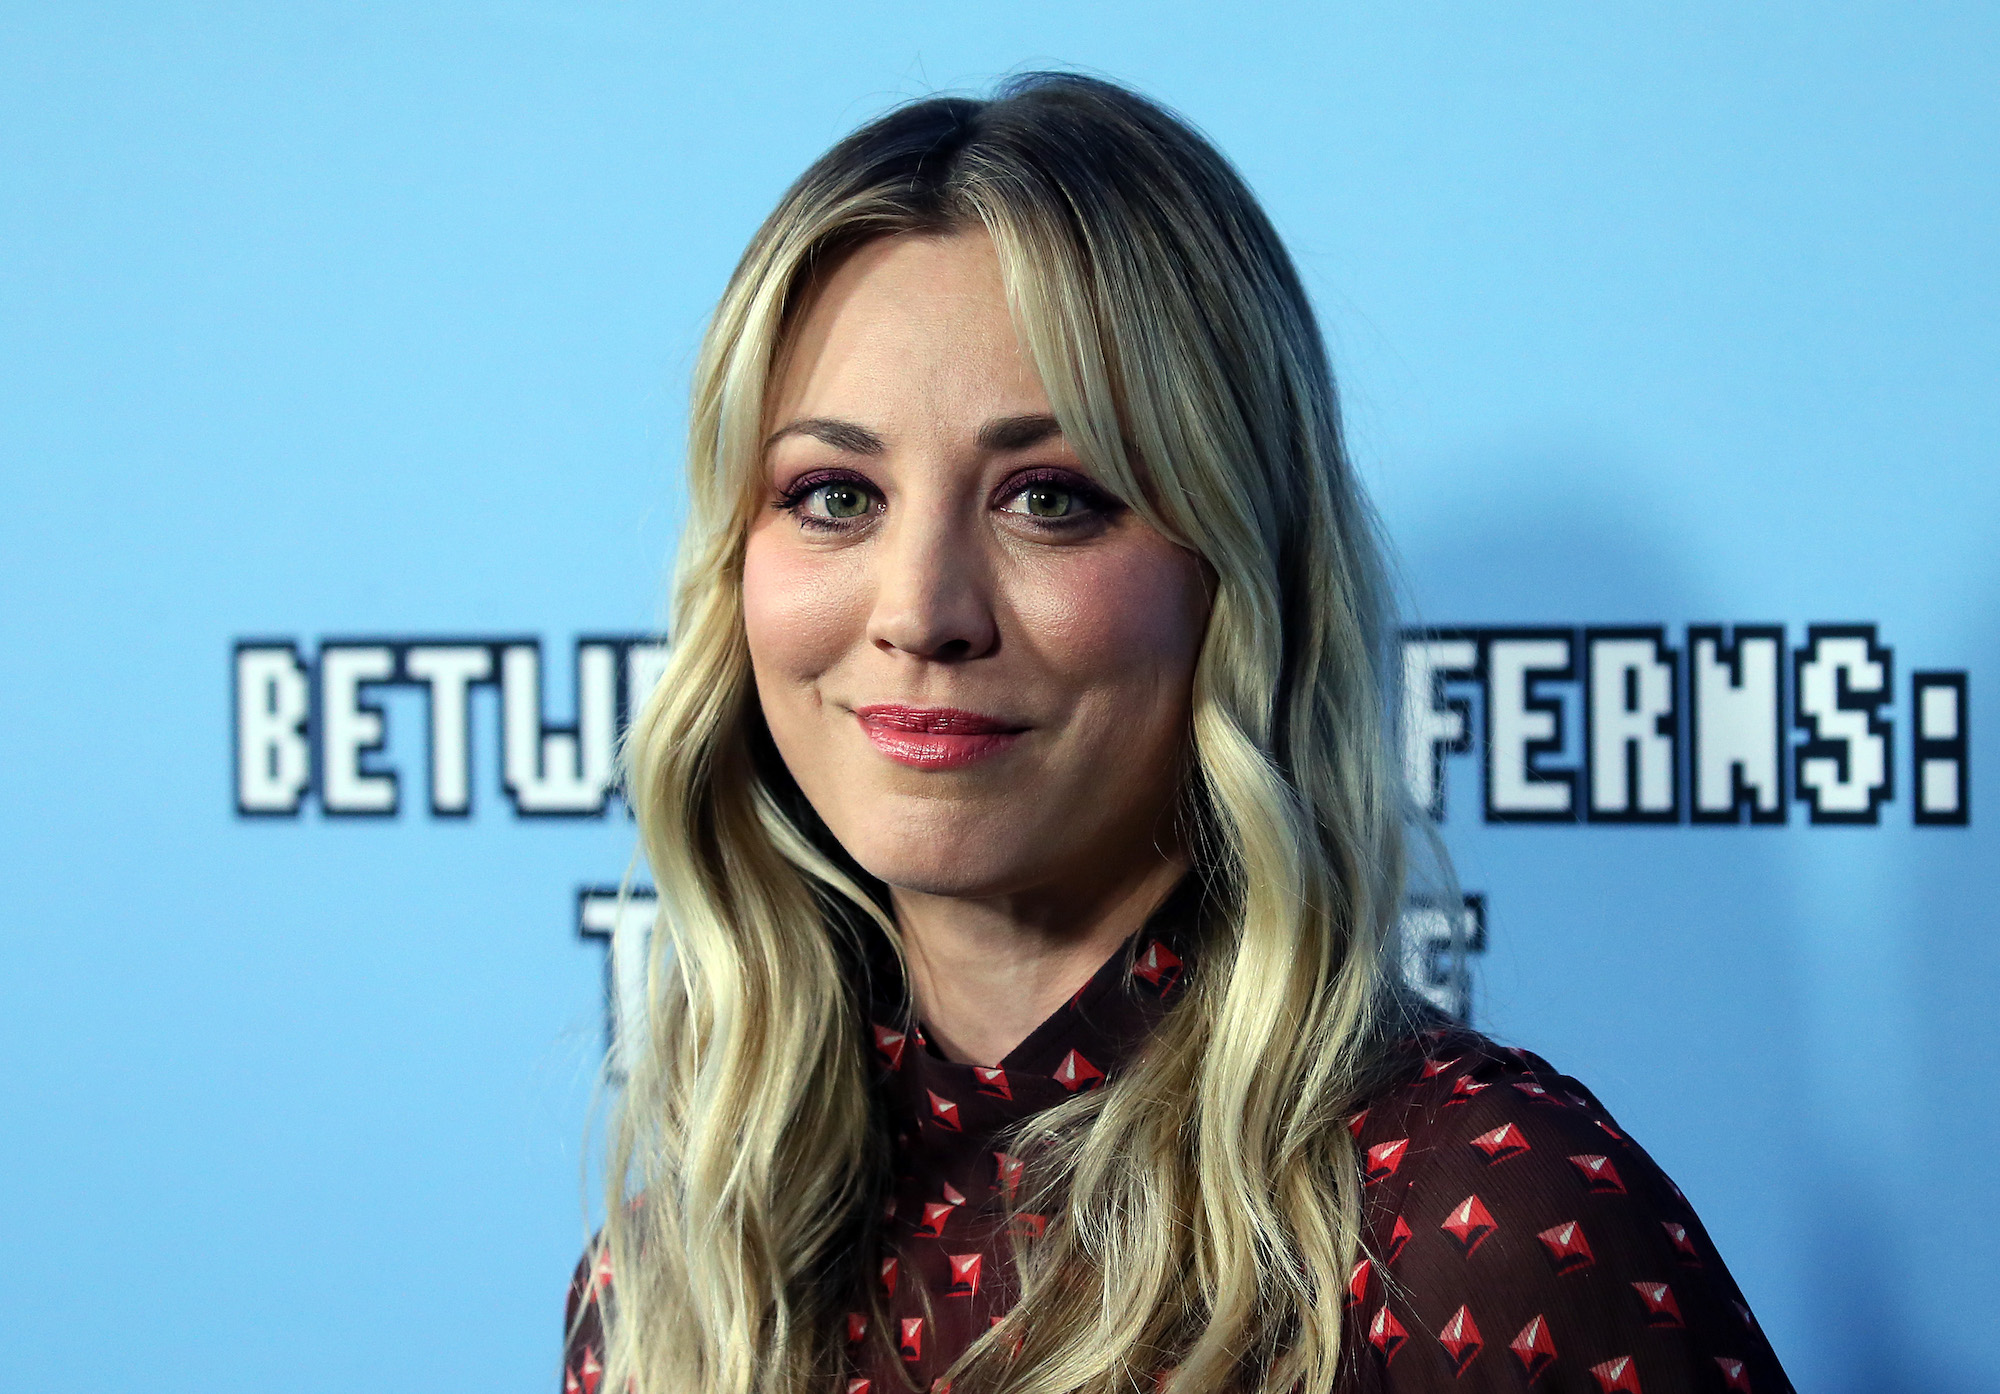 Kaley Cuoco Swears By This Foam Roller—’It Has Completely Changed My Life’